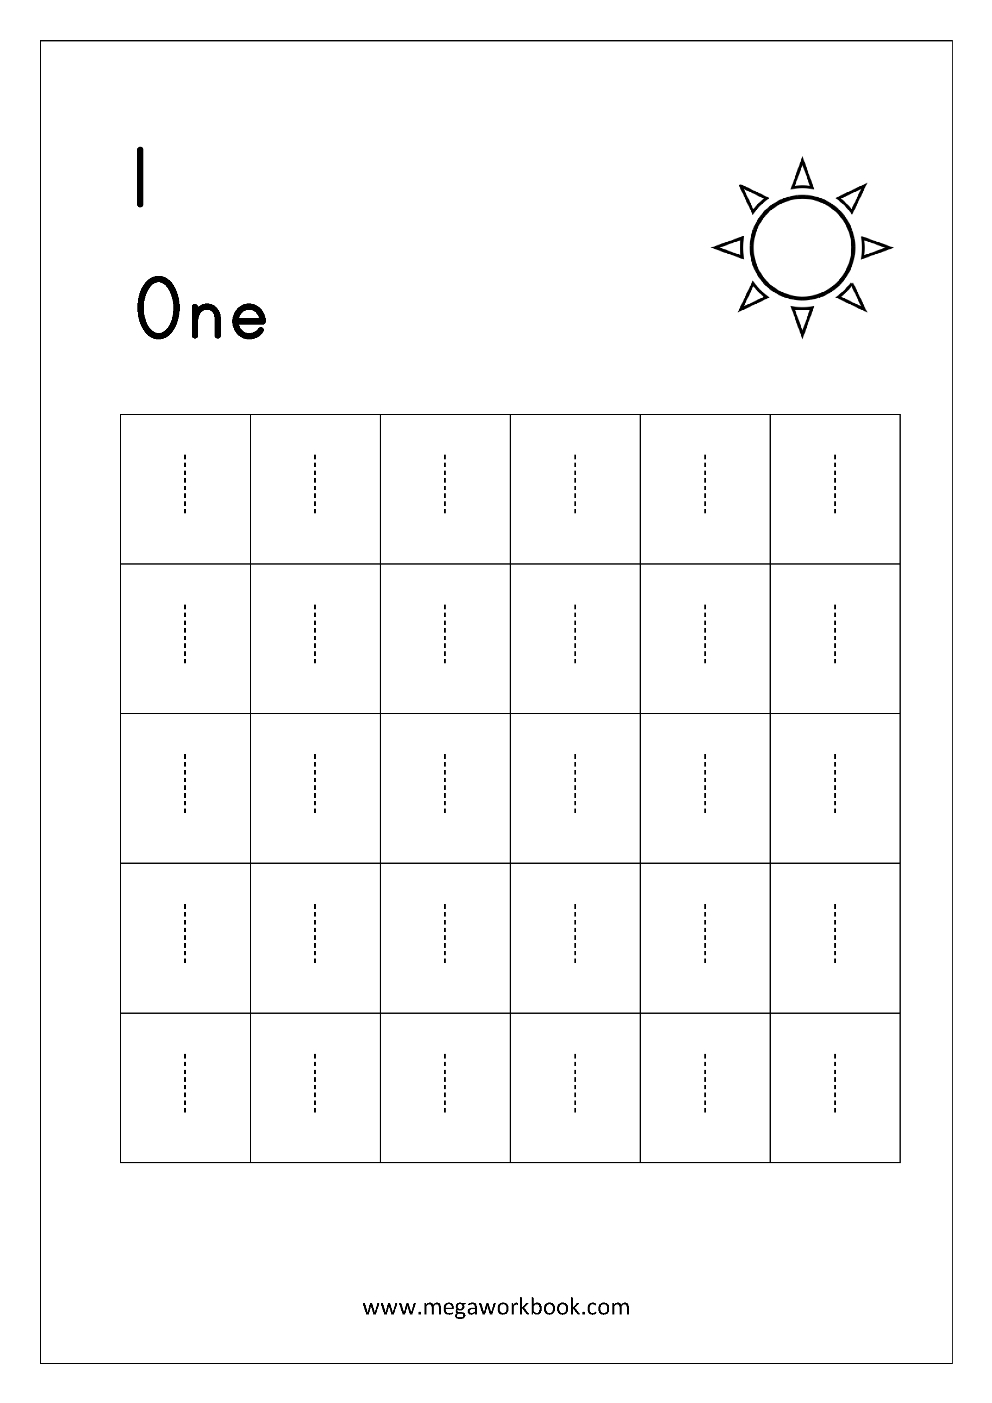 Free Printable Number Tracing And Writing (1-10) Worksheets - Number - Free Printable Tracing Worksheets